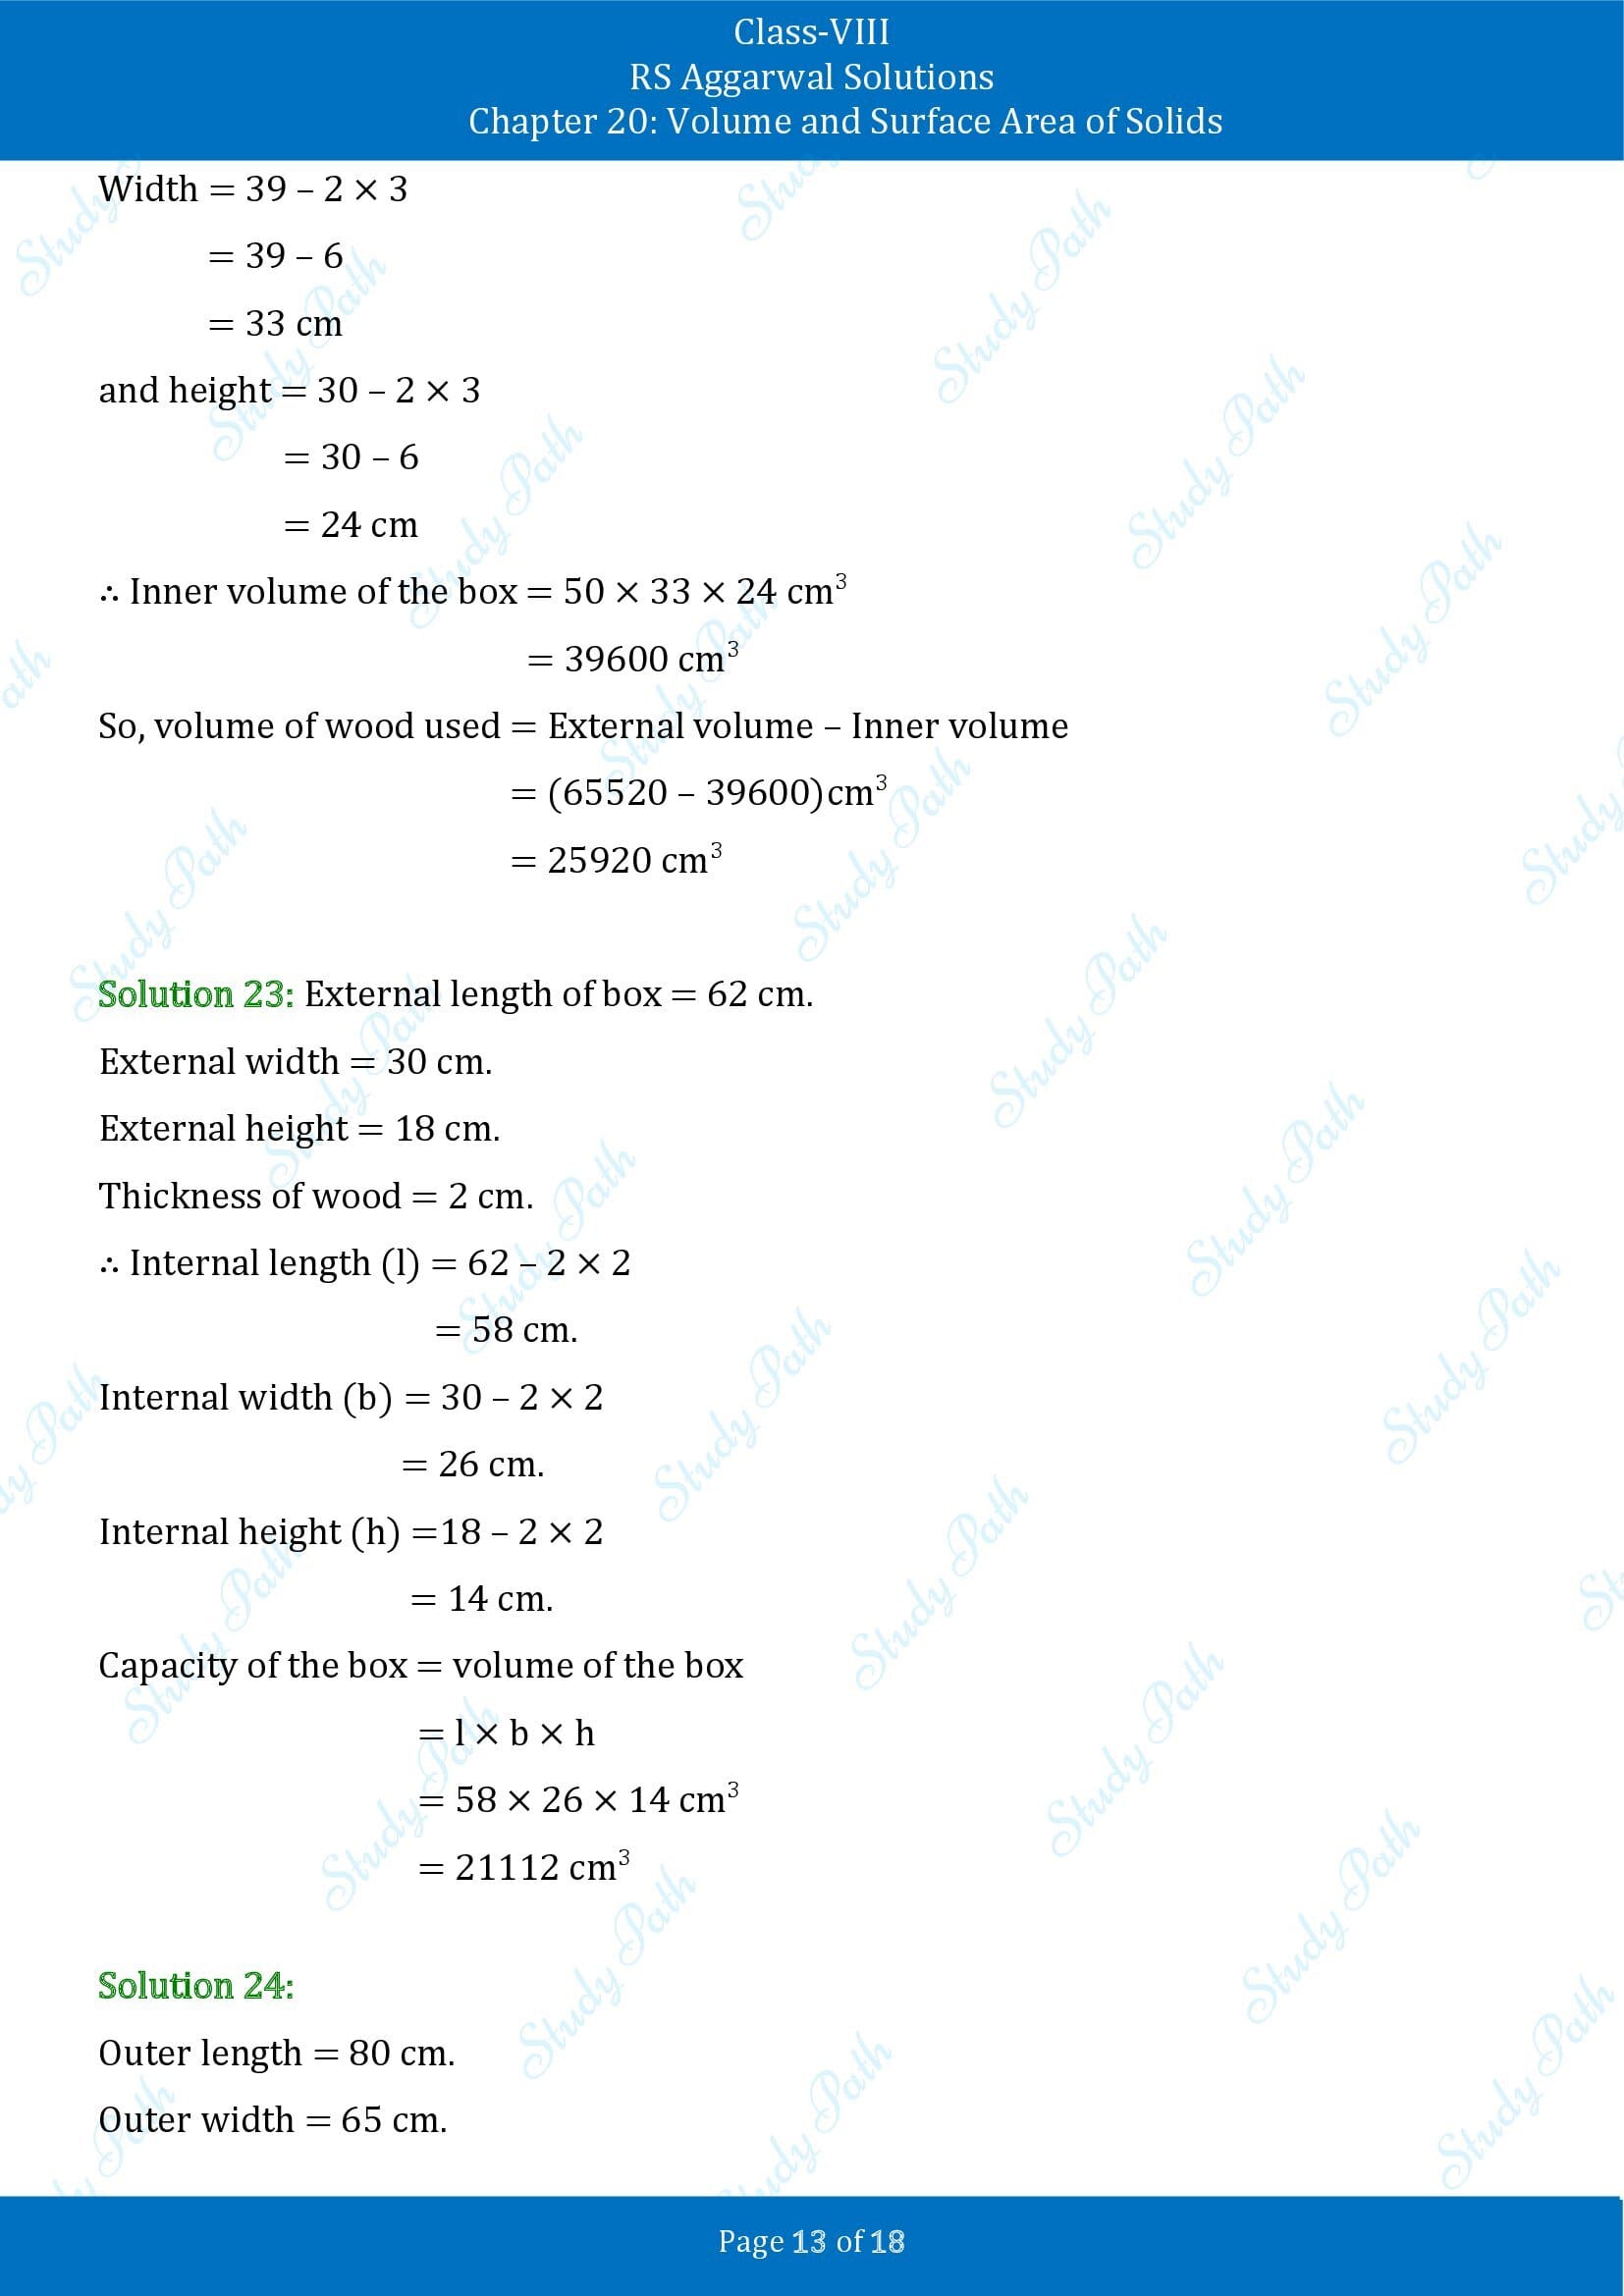 RS Aggarwal Solutions Class 8 Chapter 20 Volume and Surface Area of Solids Exercise 20A 00013